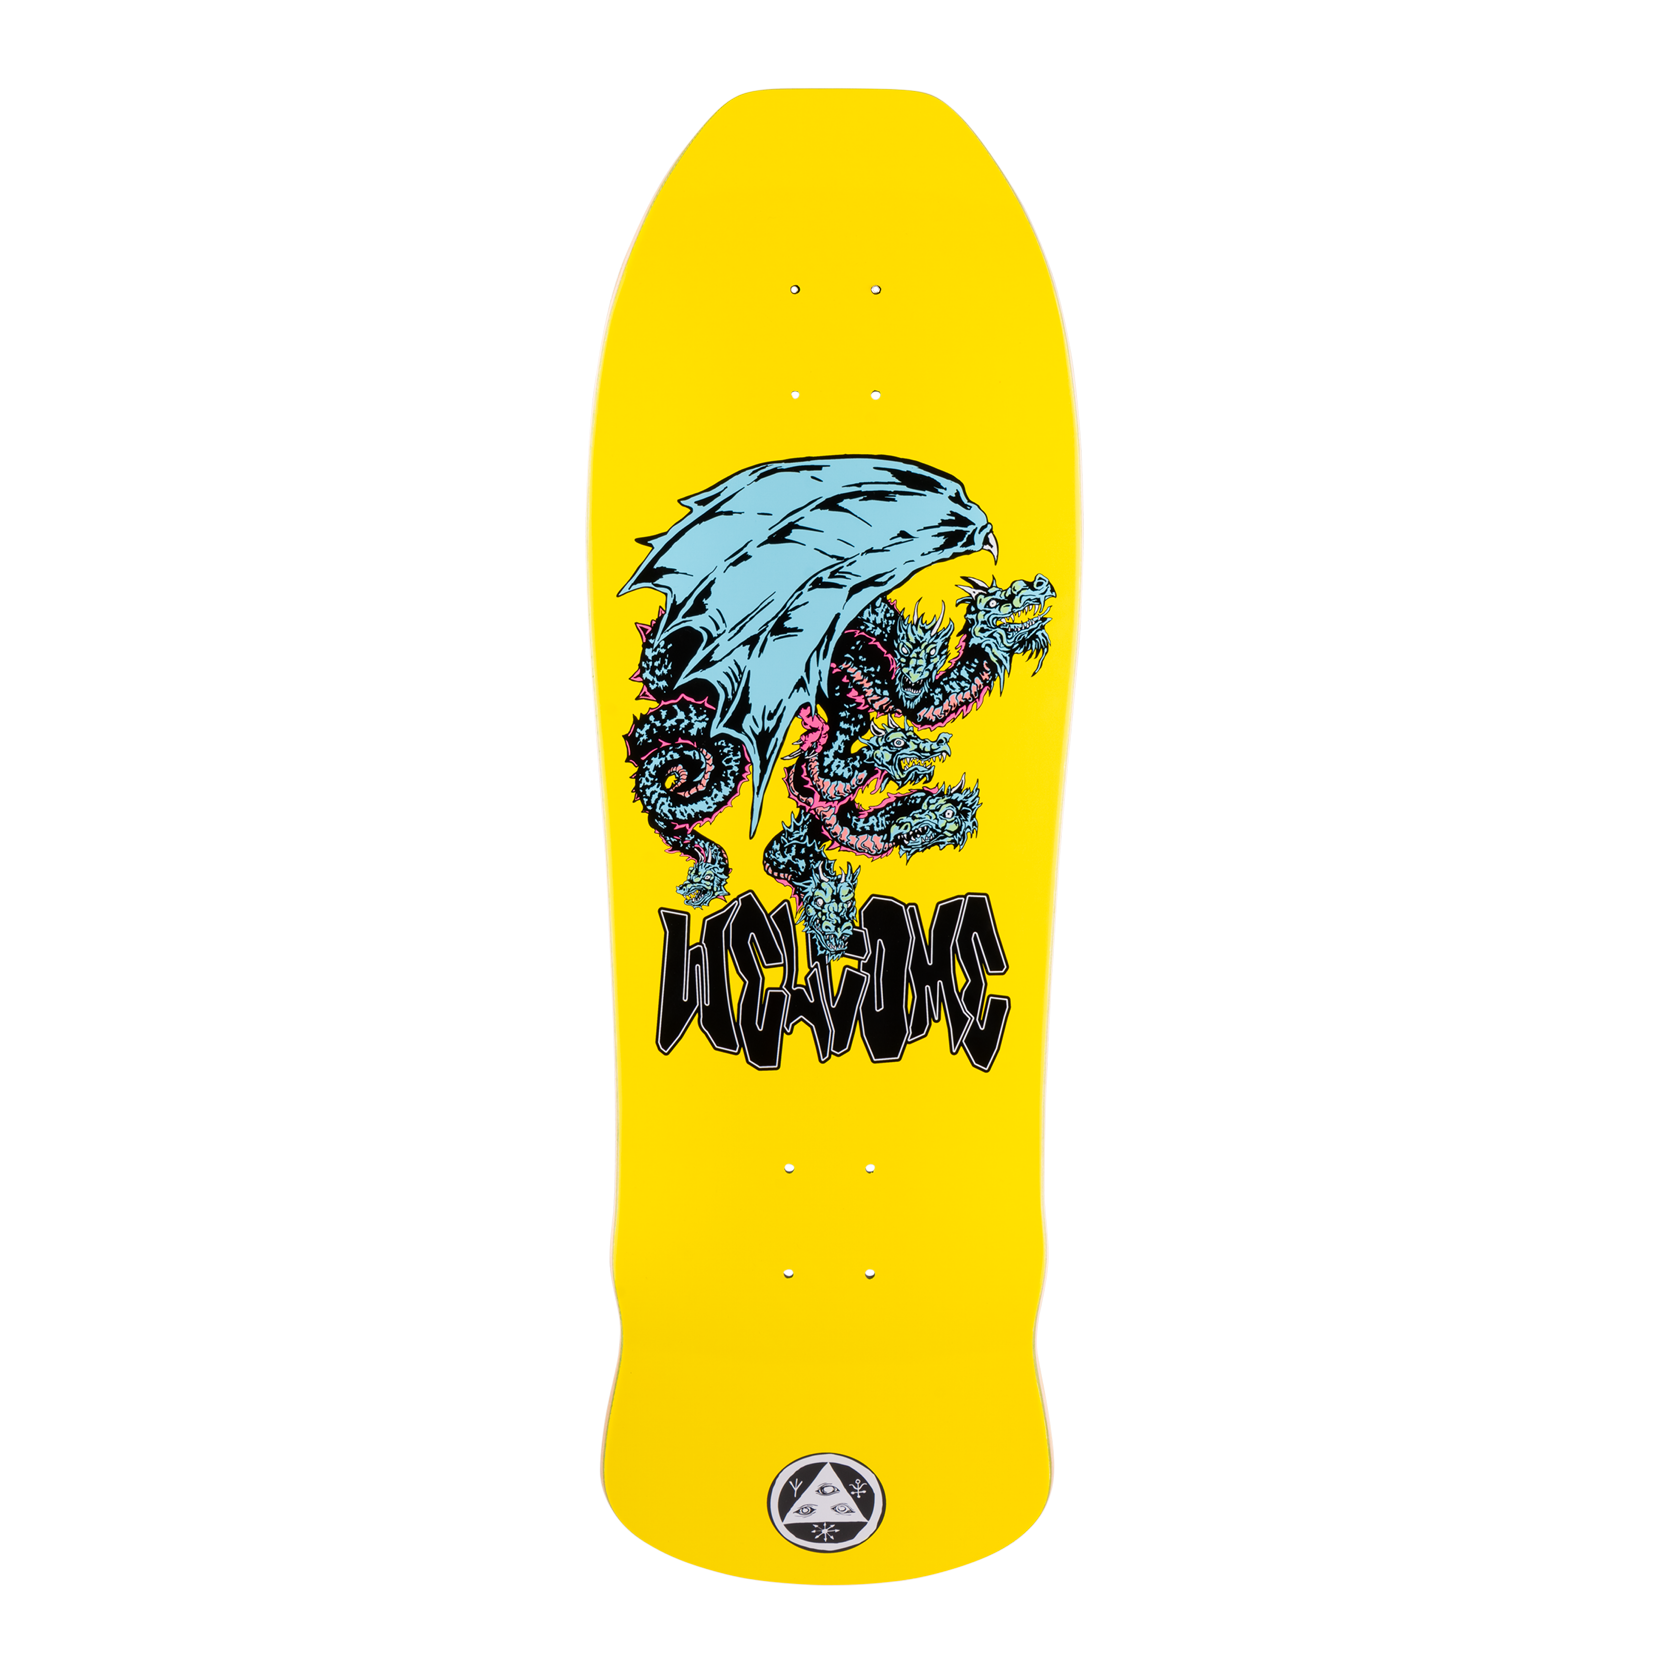 WELCOME DECK DRAGON "EARLY GRAB SHAPE" (10")